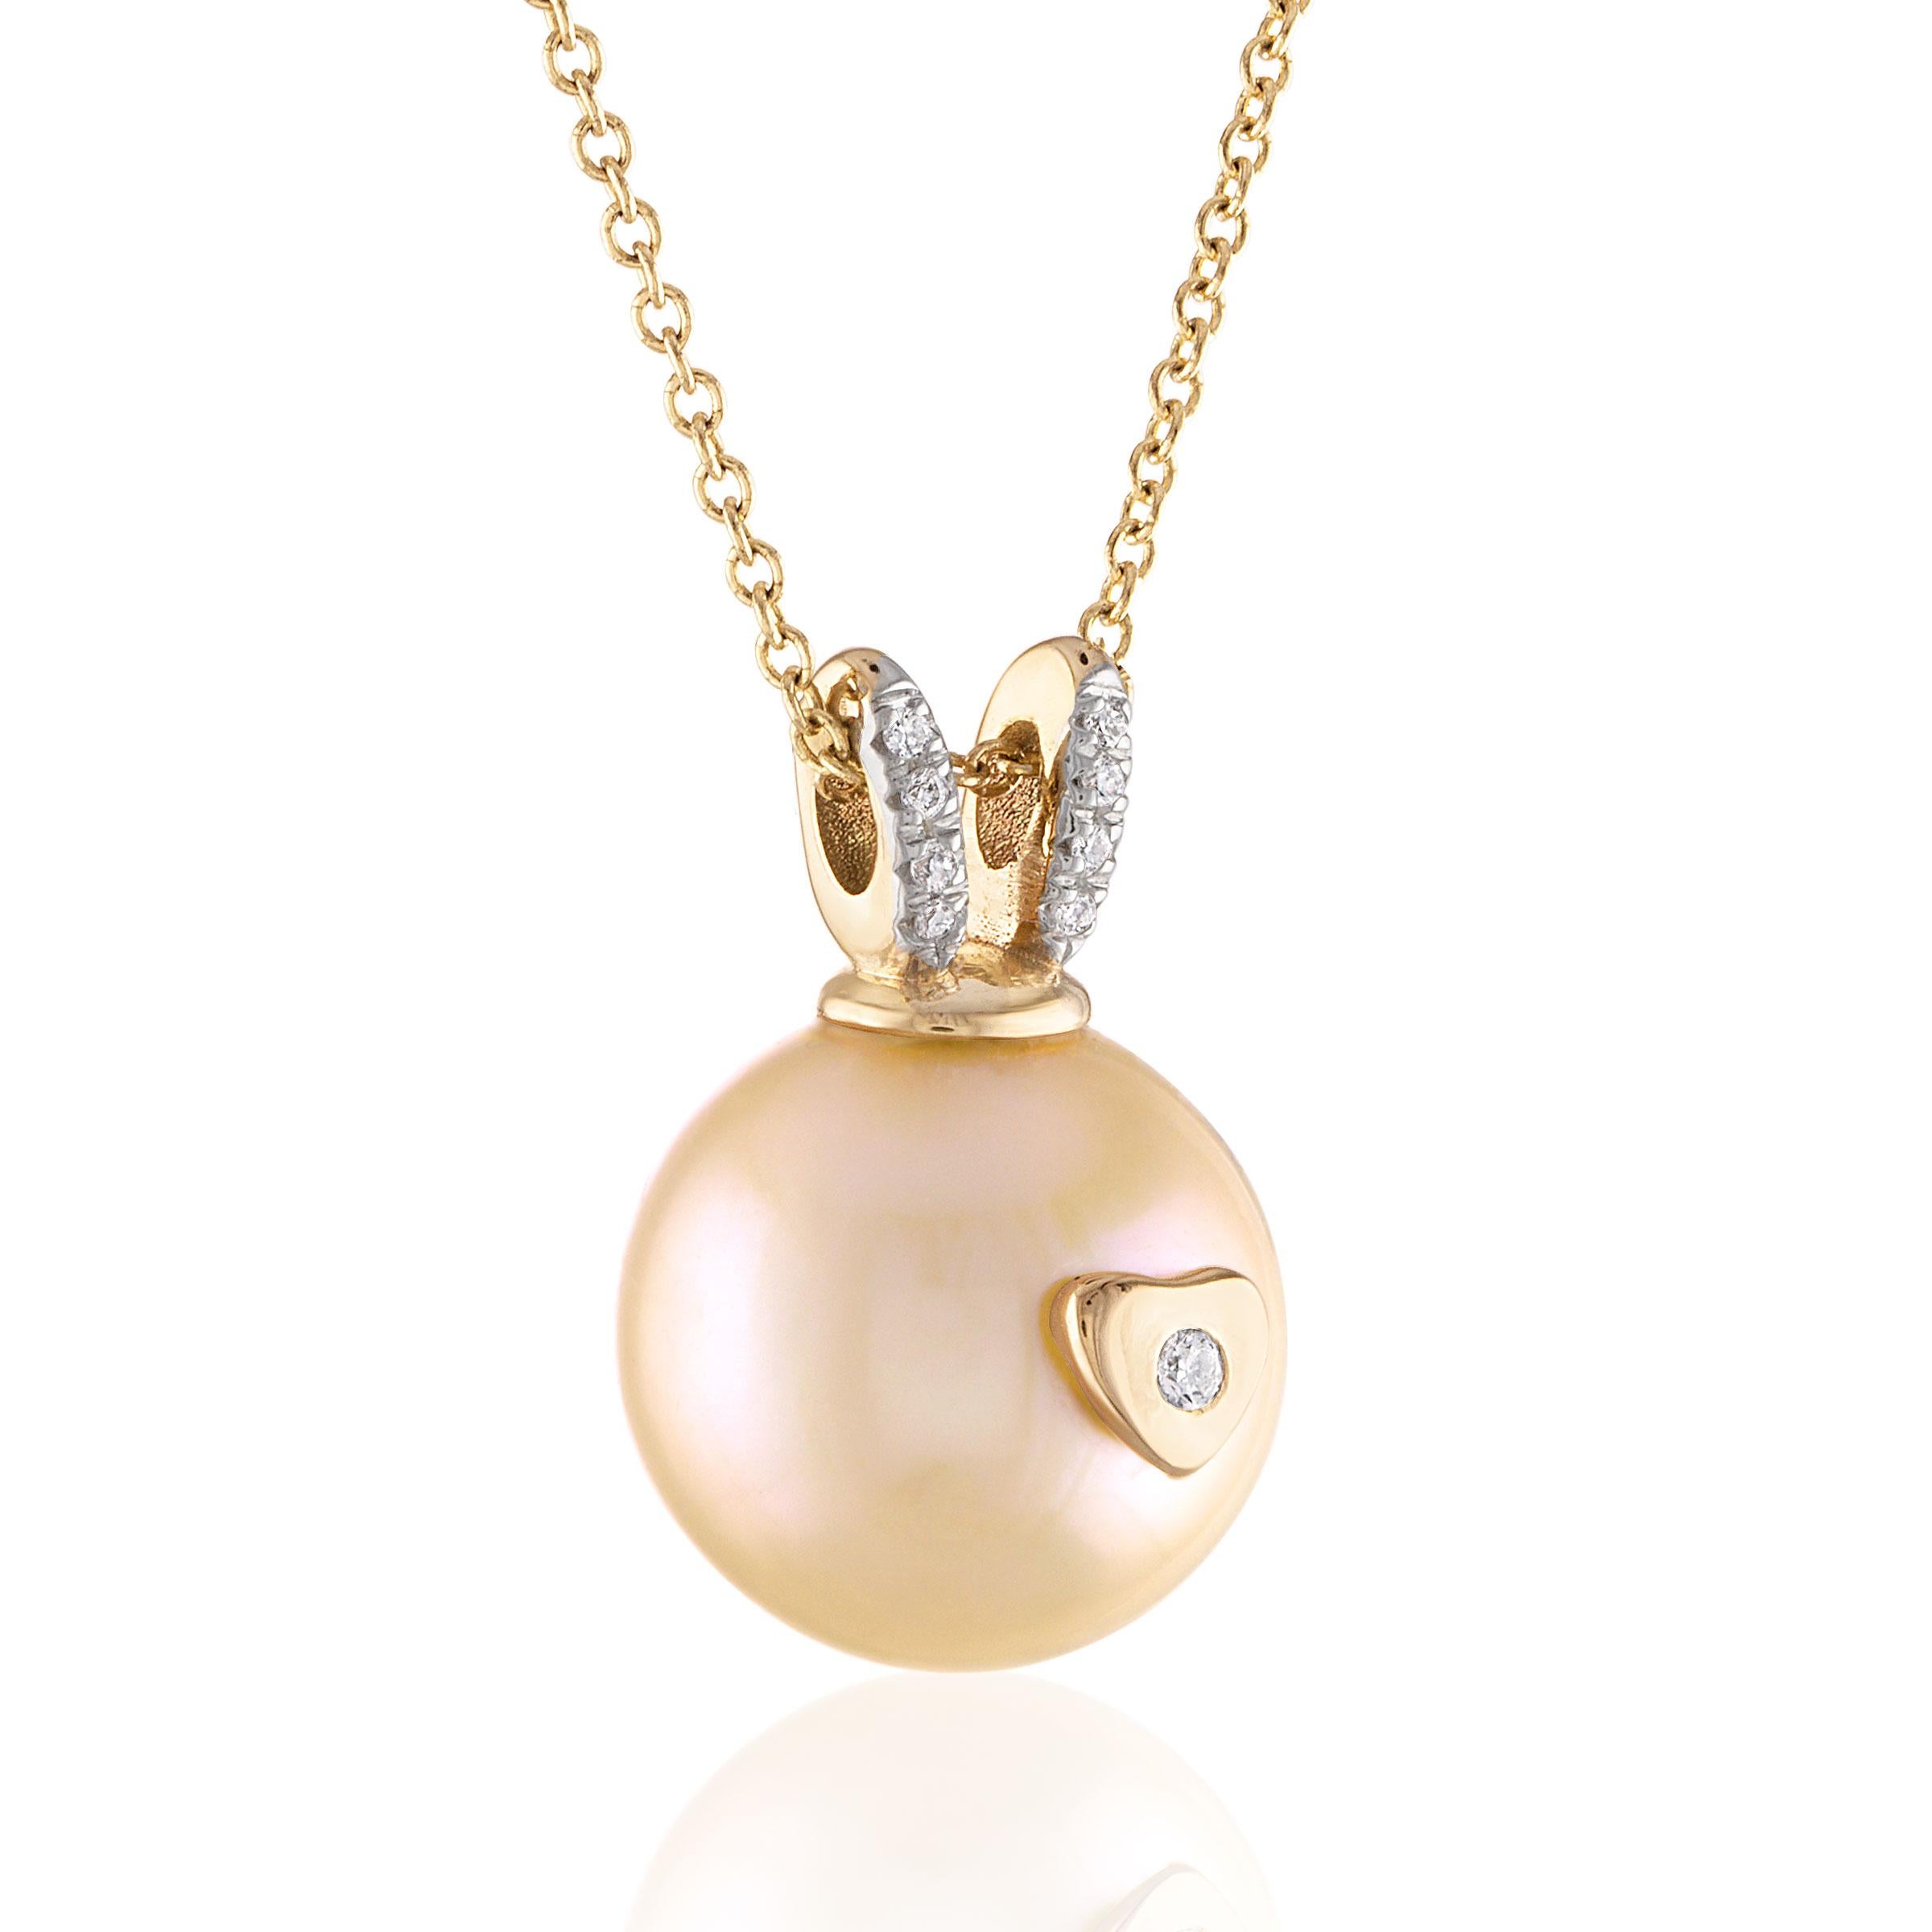 The necklace features approximately 12.3mm round Akoya pearl, 1.5mm round, brilliant cut diamond and 8 1.1mm round, brilliant cut diamonds weighing approximately 0.05 carat in total. The diamonds are F-G in color and VS2 in clarity. The chain is